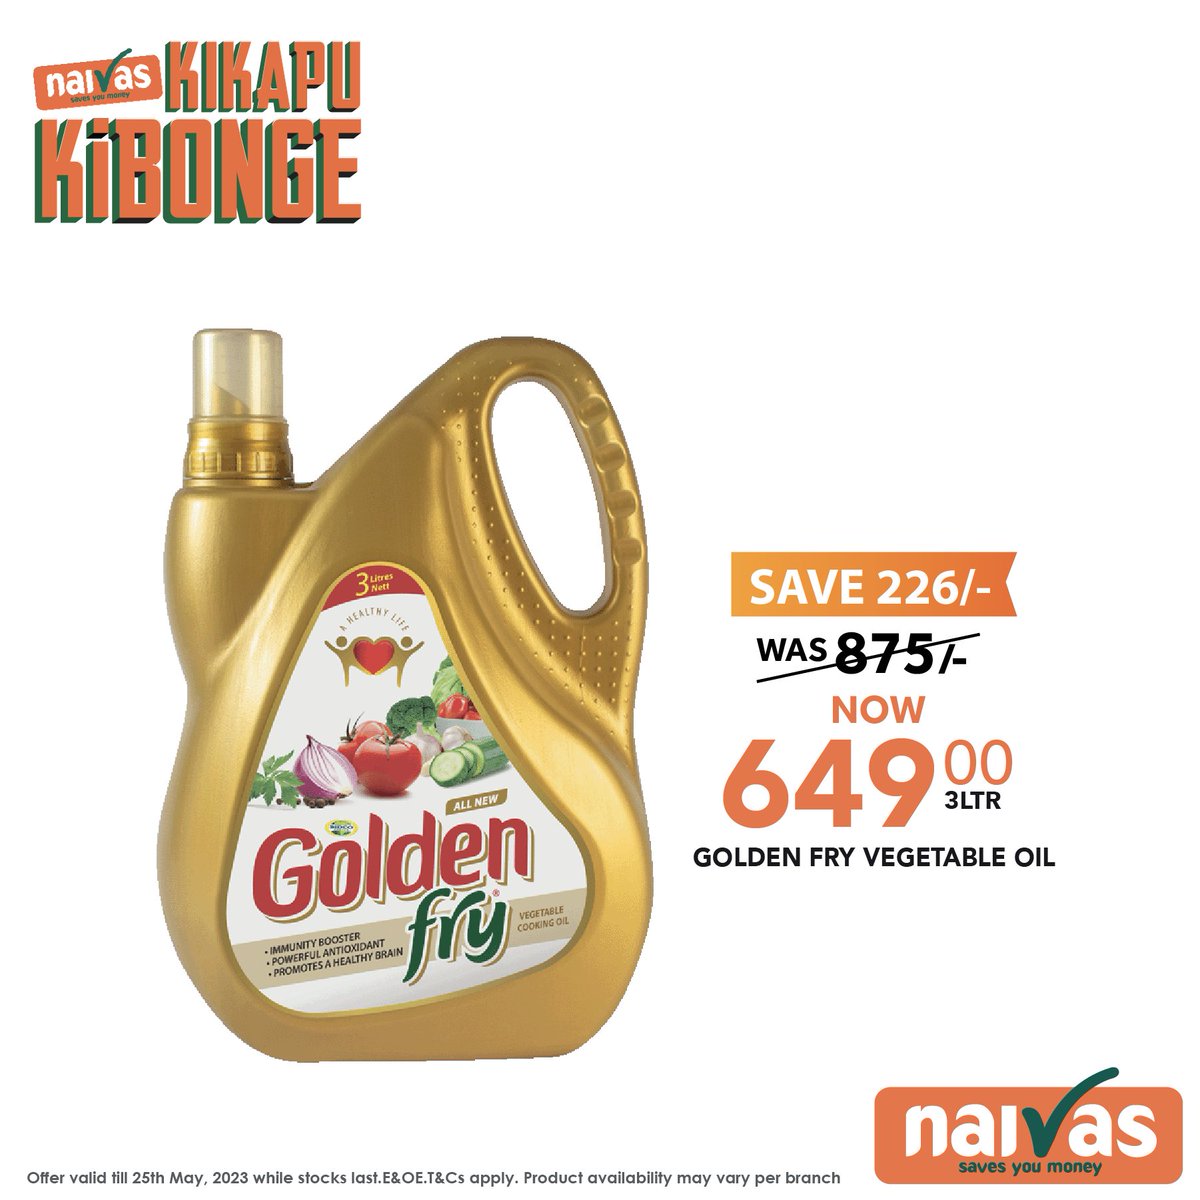 Mums love to cook🫕 especially when the children are around. She will wake up at the crack of dawn hata kama utafika saa nane mchana! 🛍️Surprise a mum this week with some cooking oil now on offer! She'll be glad! #NaivasKikapuKibonge ✓ *Valid until 25th May 2023